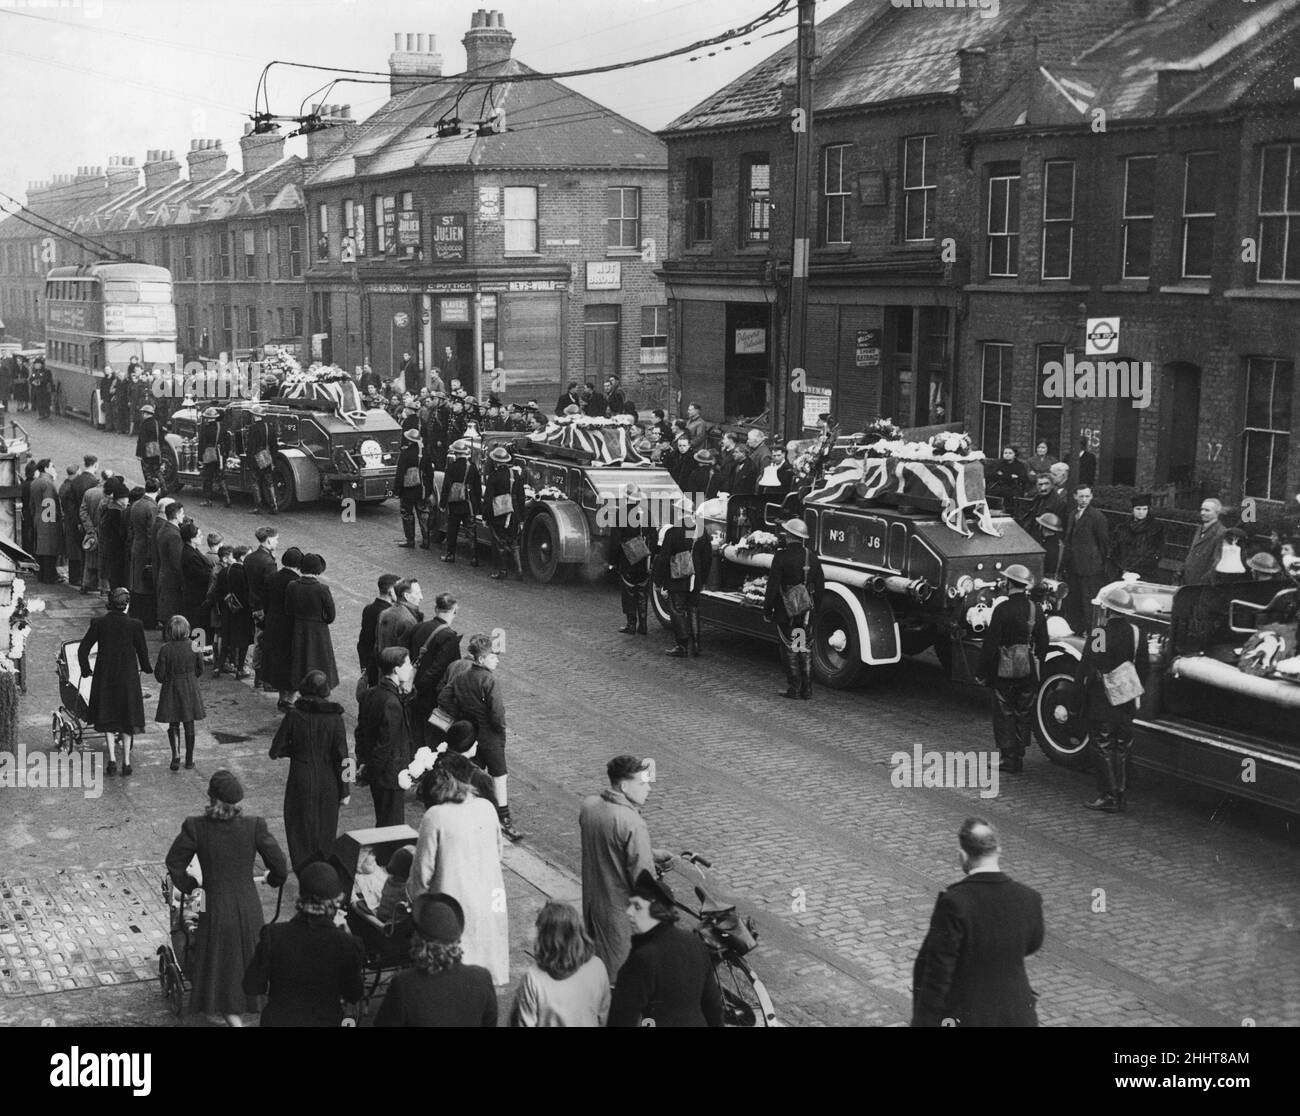 Coffins are draped by Union Jacks borne on fire appliances in procession through Plaistow on the way to the cemetery during the funeral of Plaistow fireman who were killed in the blitz.Circa 1941. Stock Photo